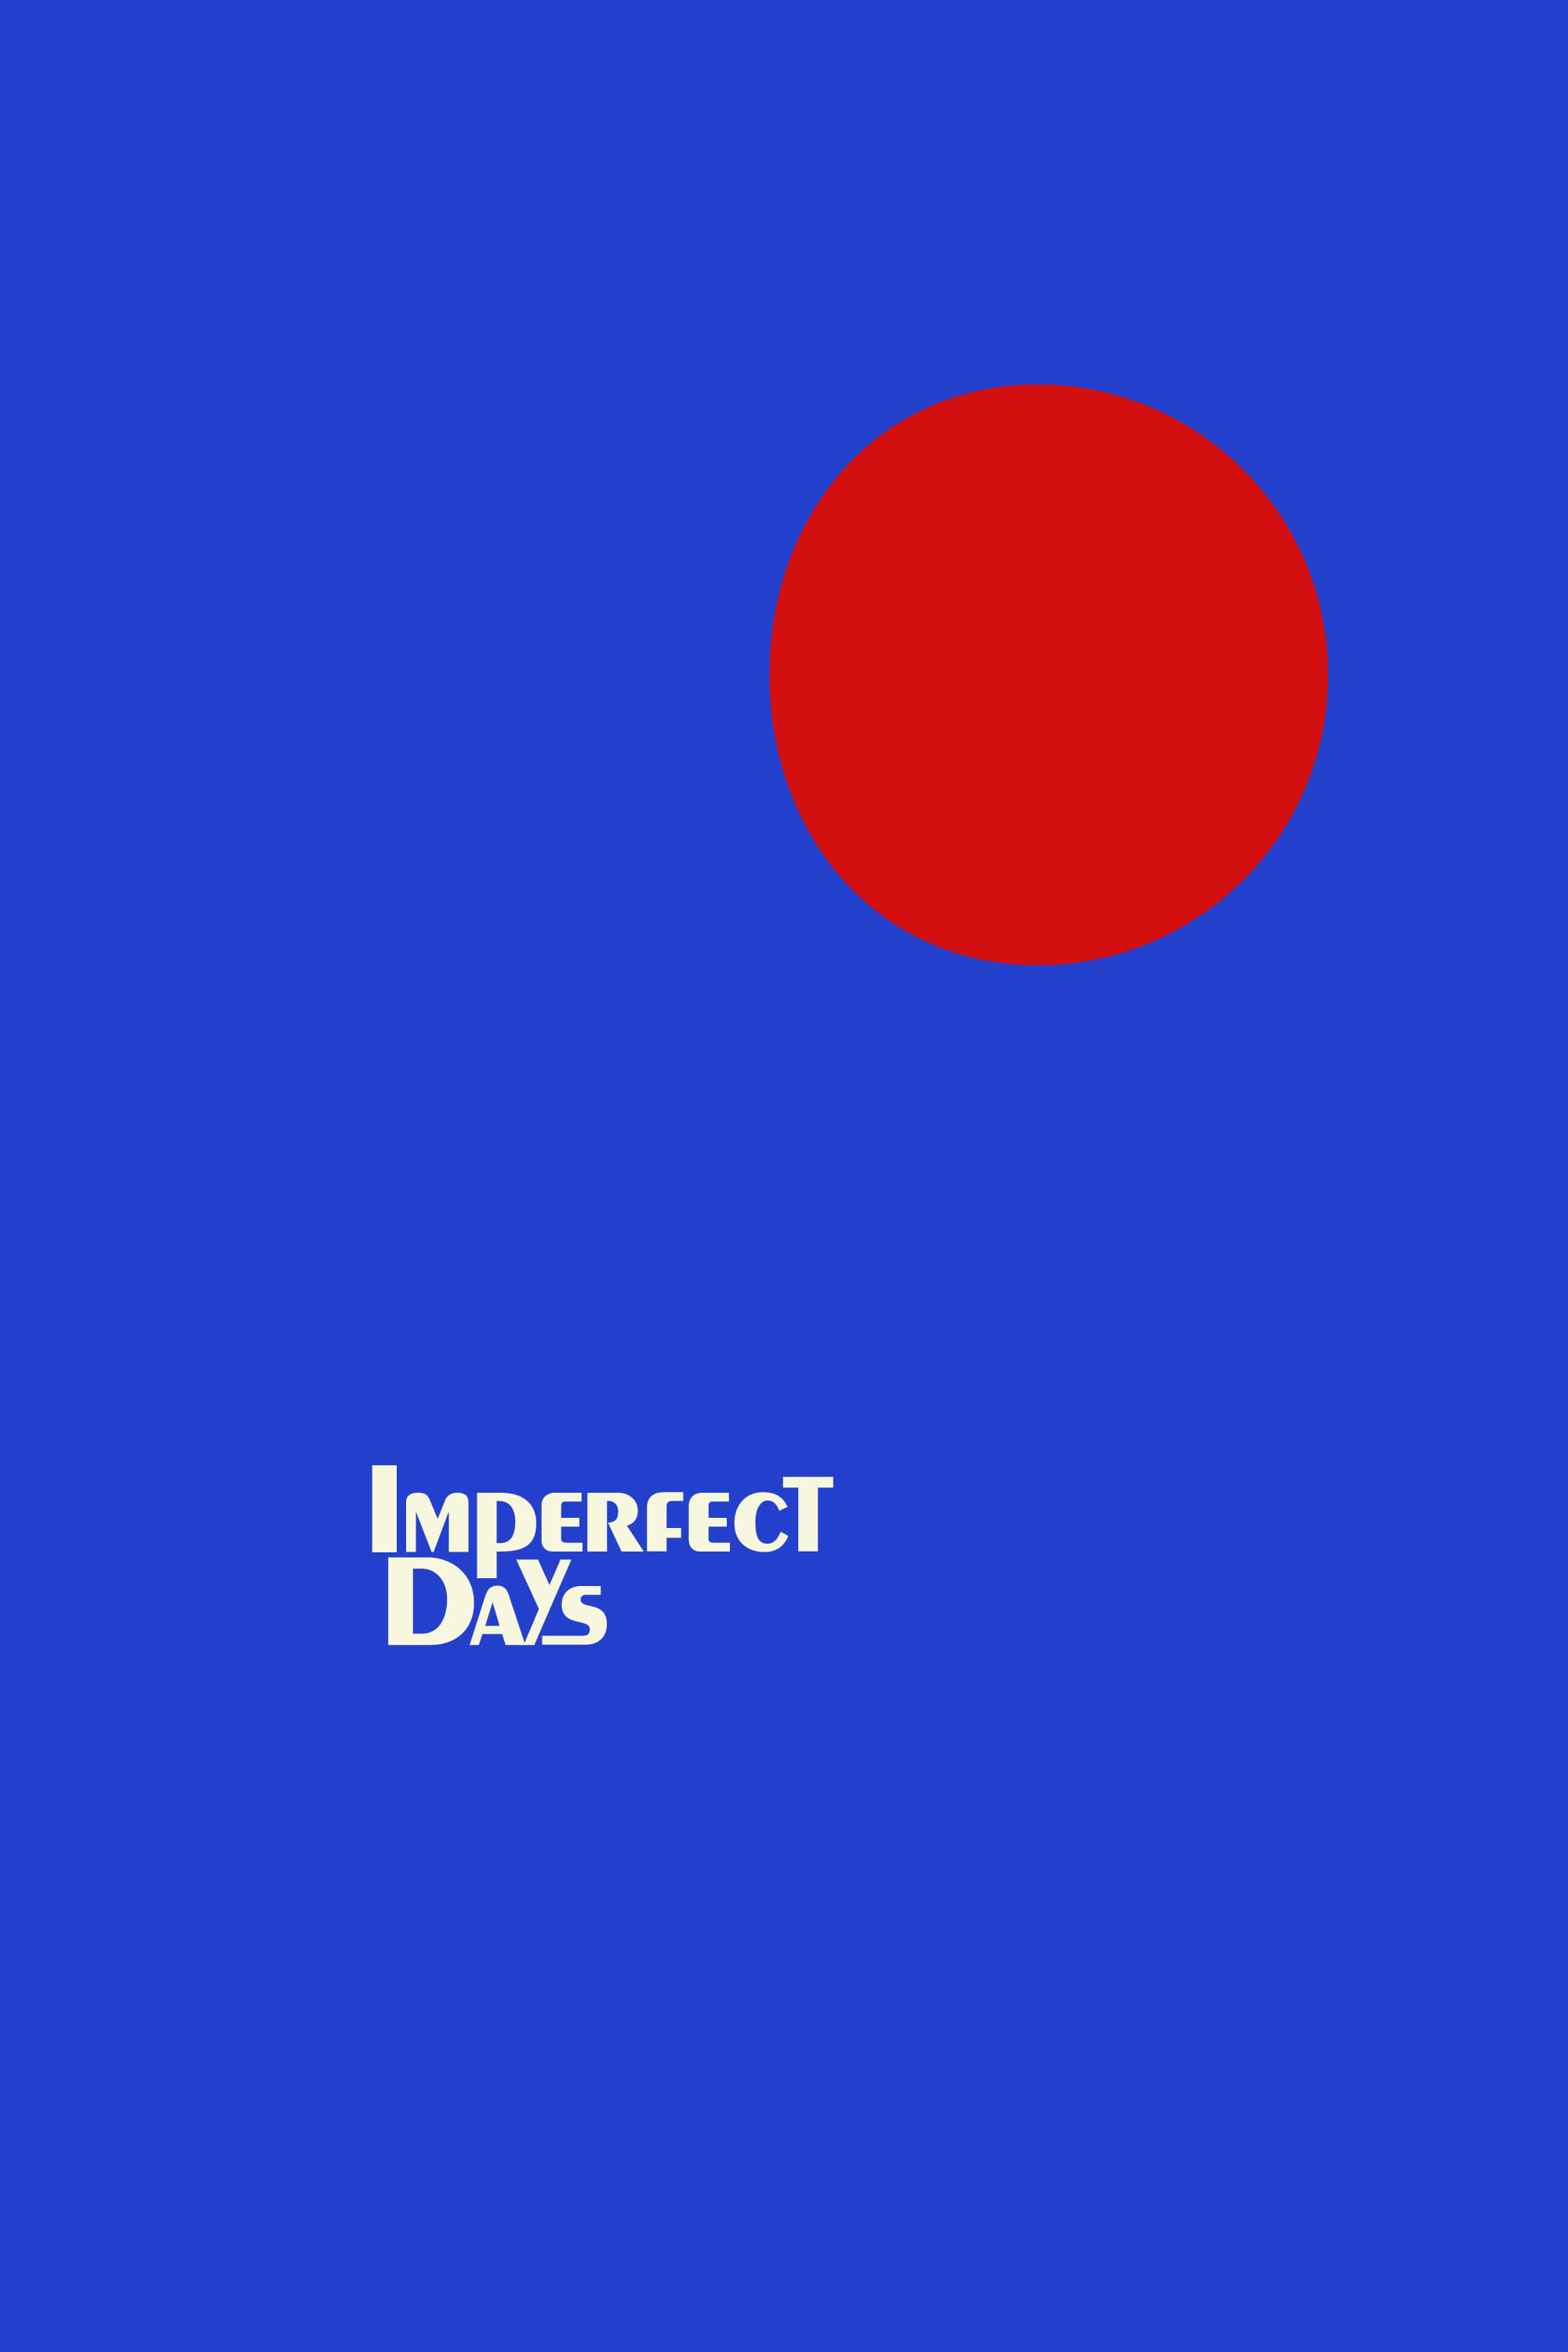 Imperfect Days